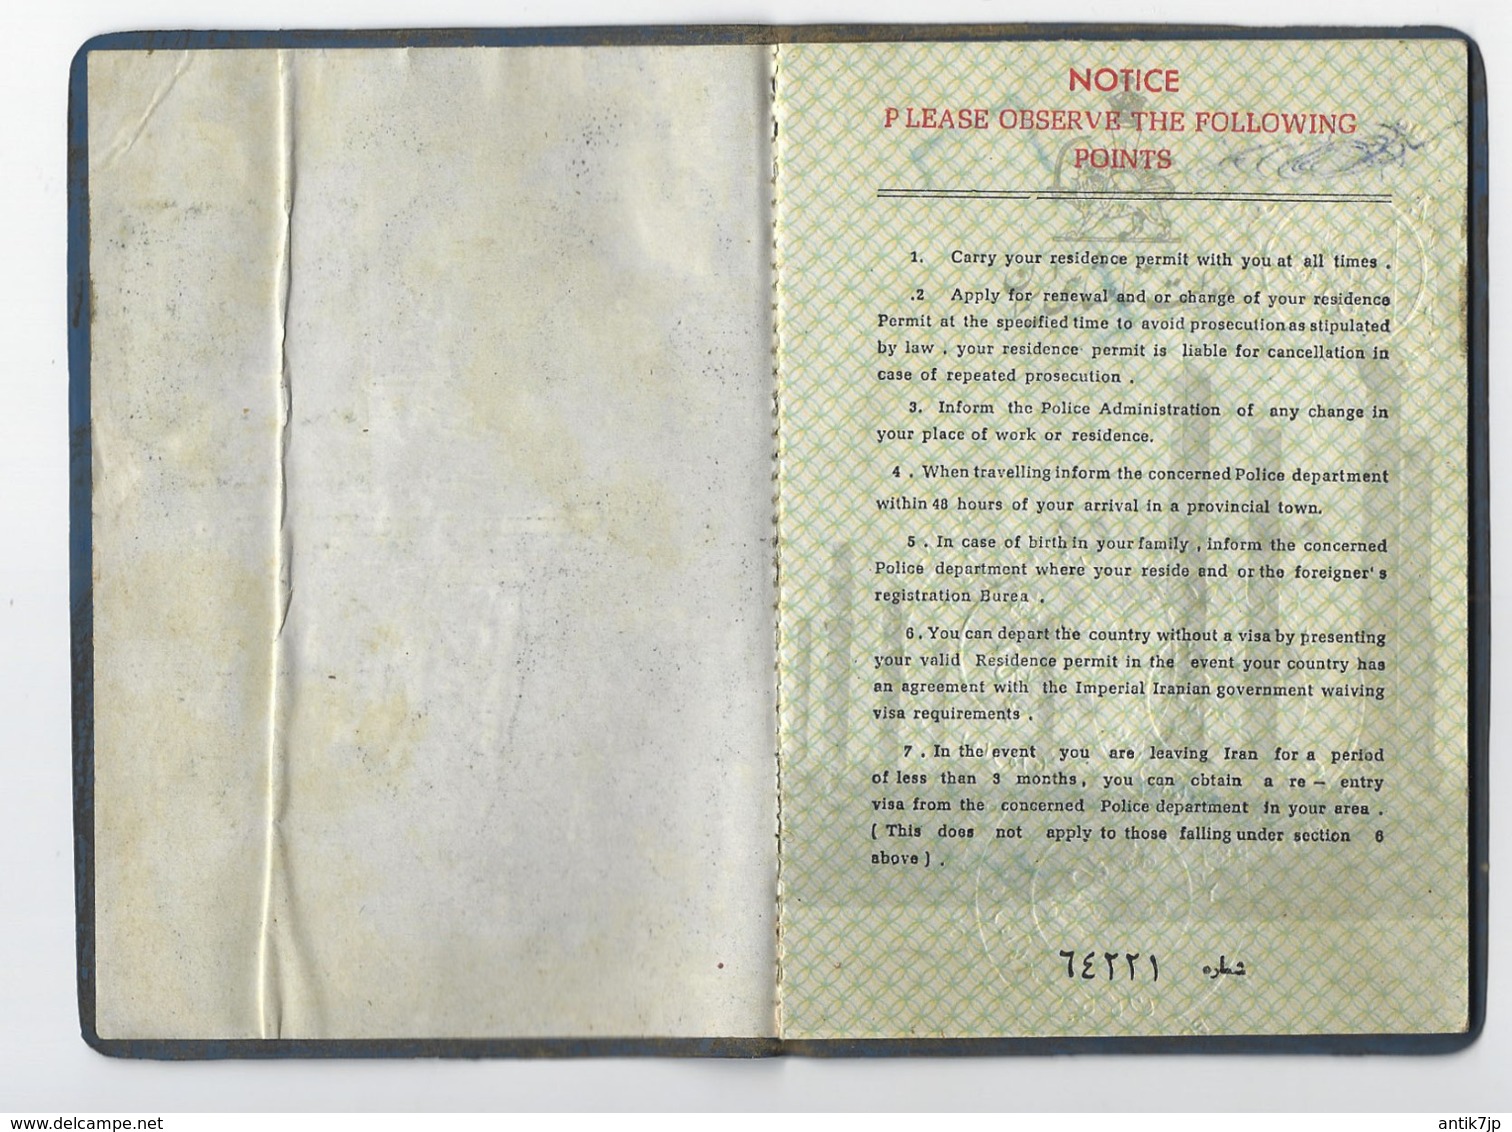 JUDAICA NATIONAL POLICE OF IRAN RESIDENCE PERMIT FOR ISRAELI CITIZEN 1970s - Historical Documents